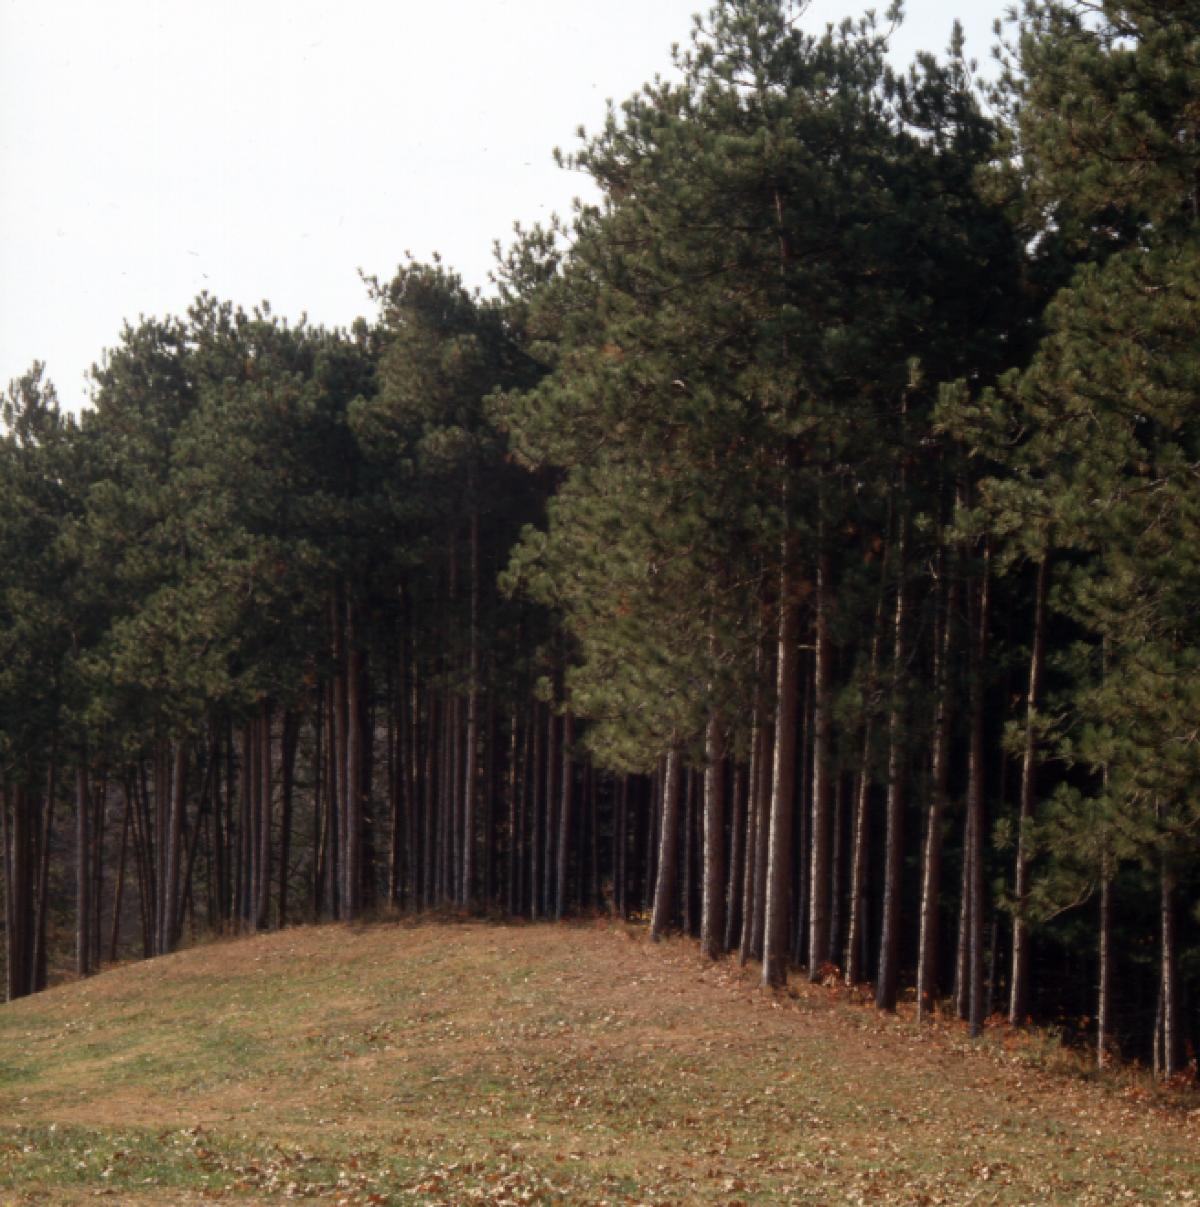 Red pine grove, North Woods, Storm King Art Center, 2001